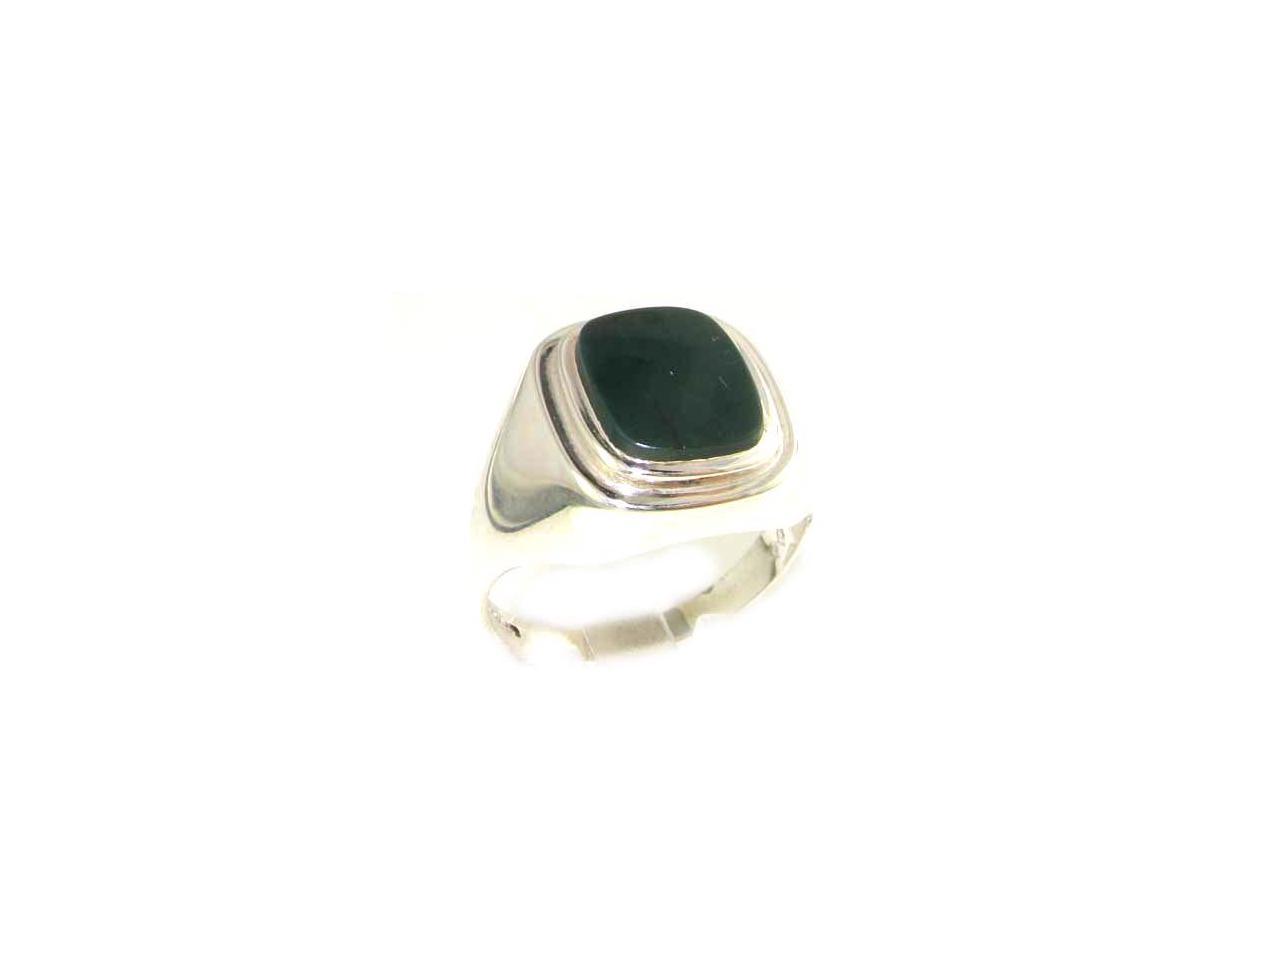 Bloodstone Ring Sterling Silver Rare Natural Bloodstone Ring Size 6.5